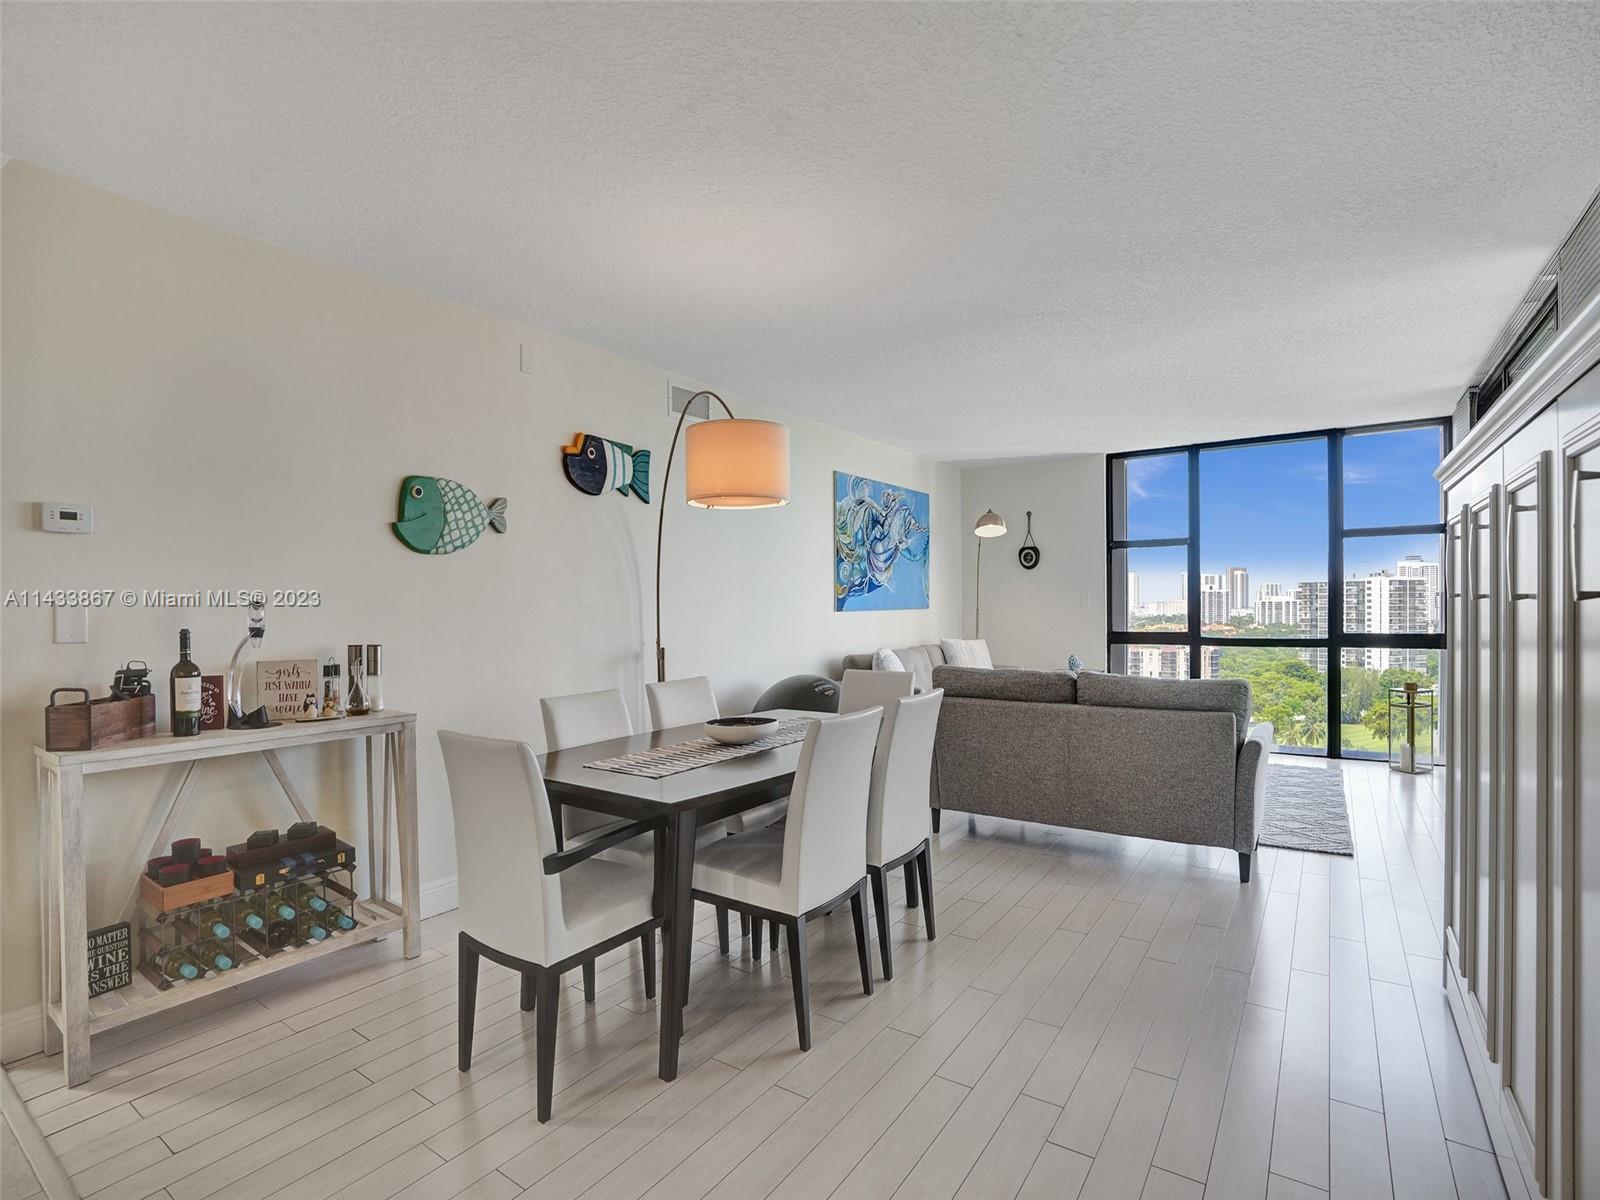 Condo in the heart of Aventura, Florida. Offers views of the lush Turnberry Golf course and the city